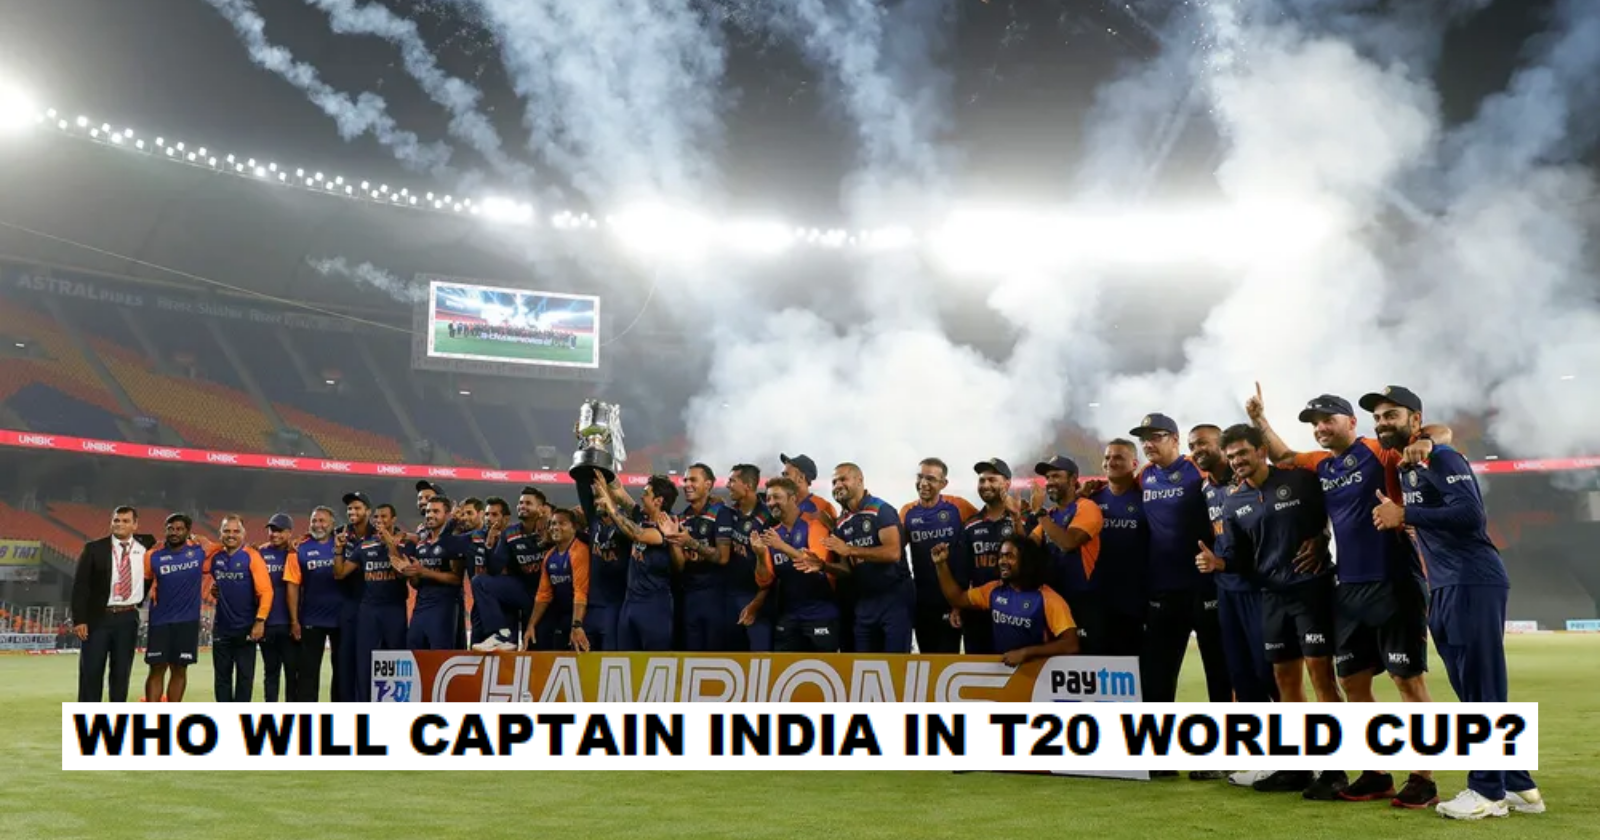 ICC T20 World Cup 2021: India's Squad For The Tournament